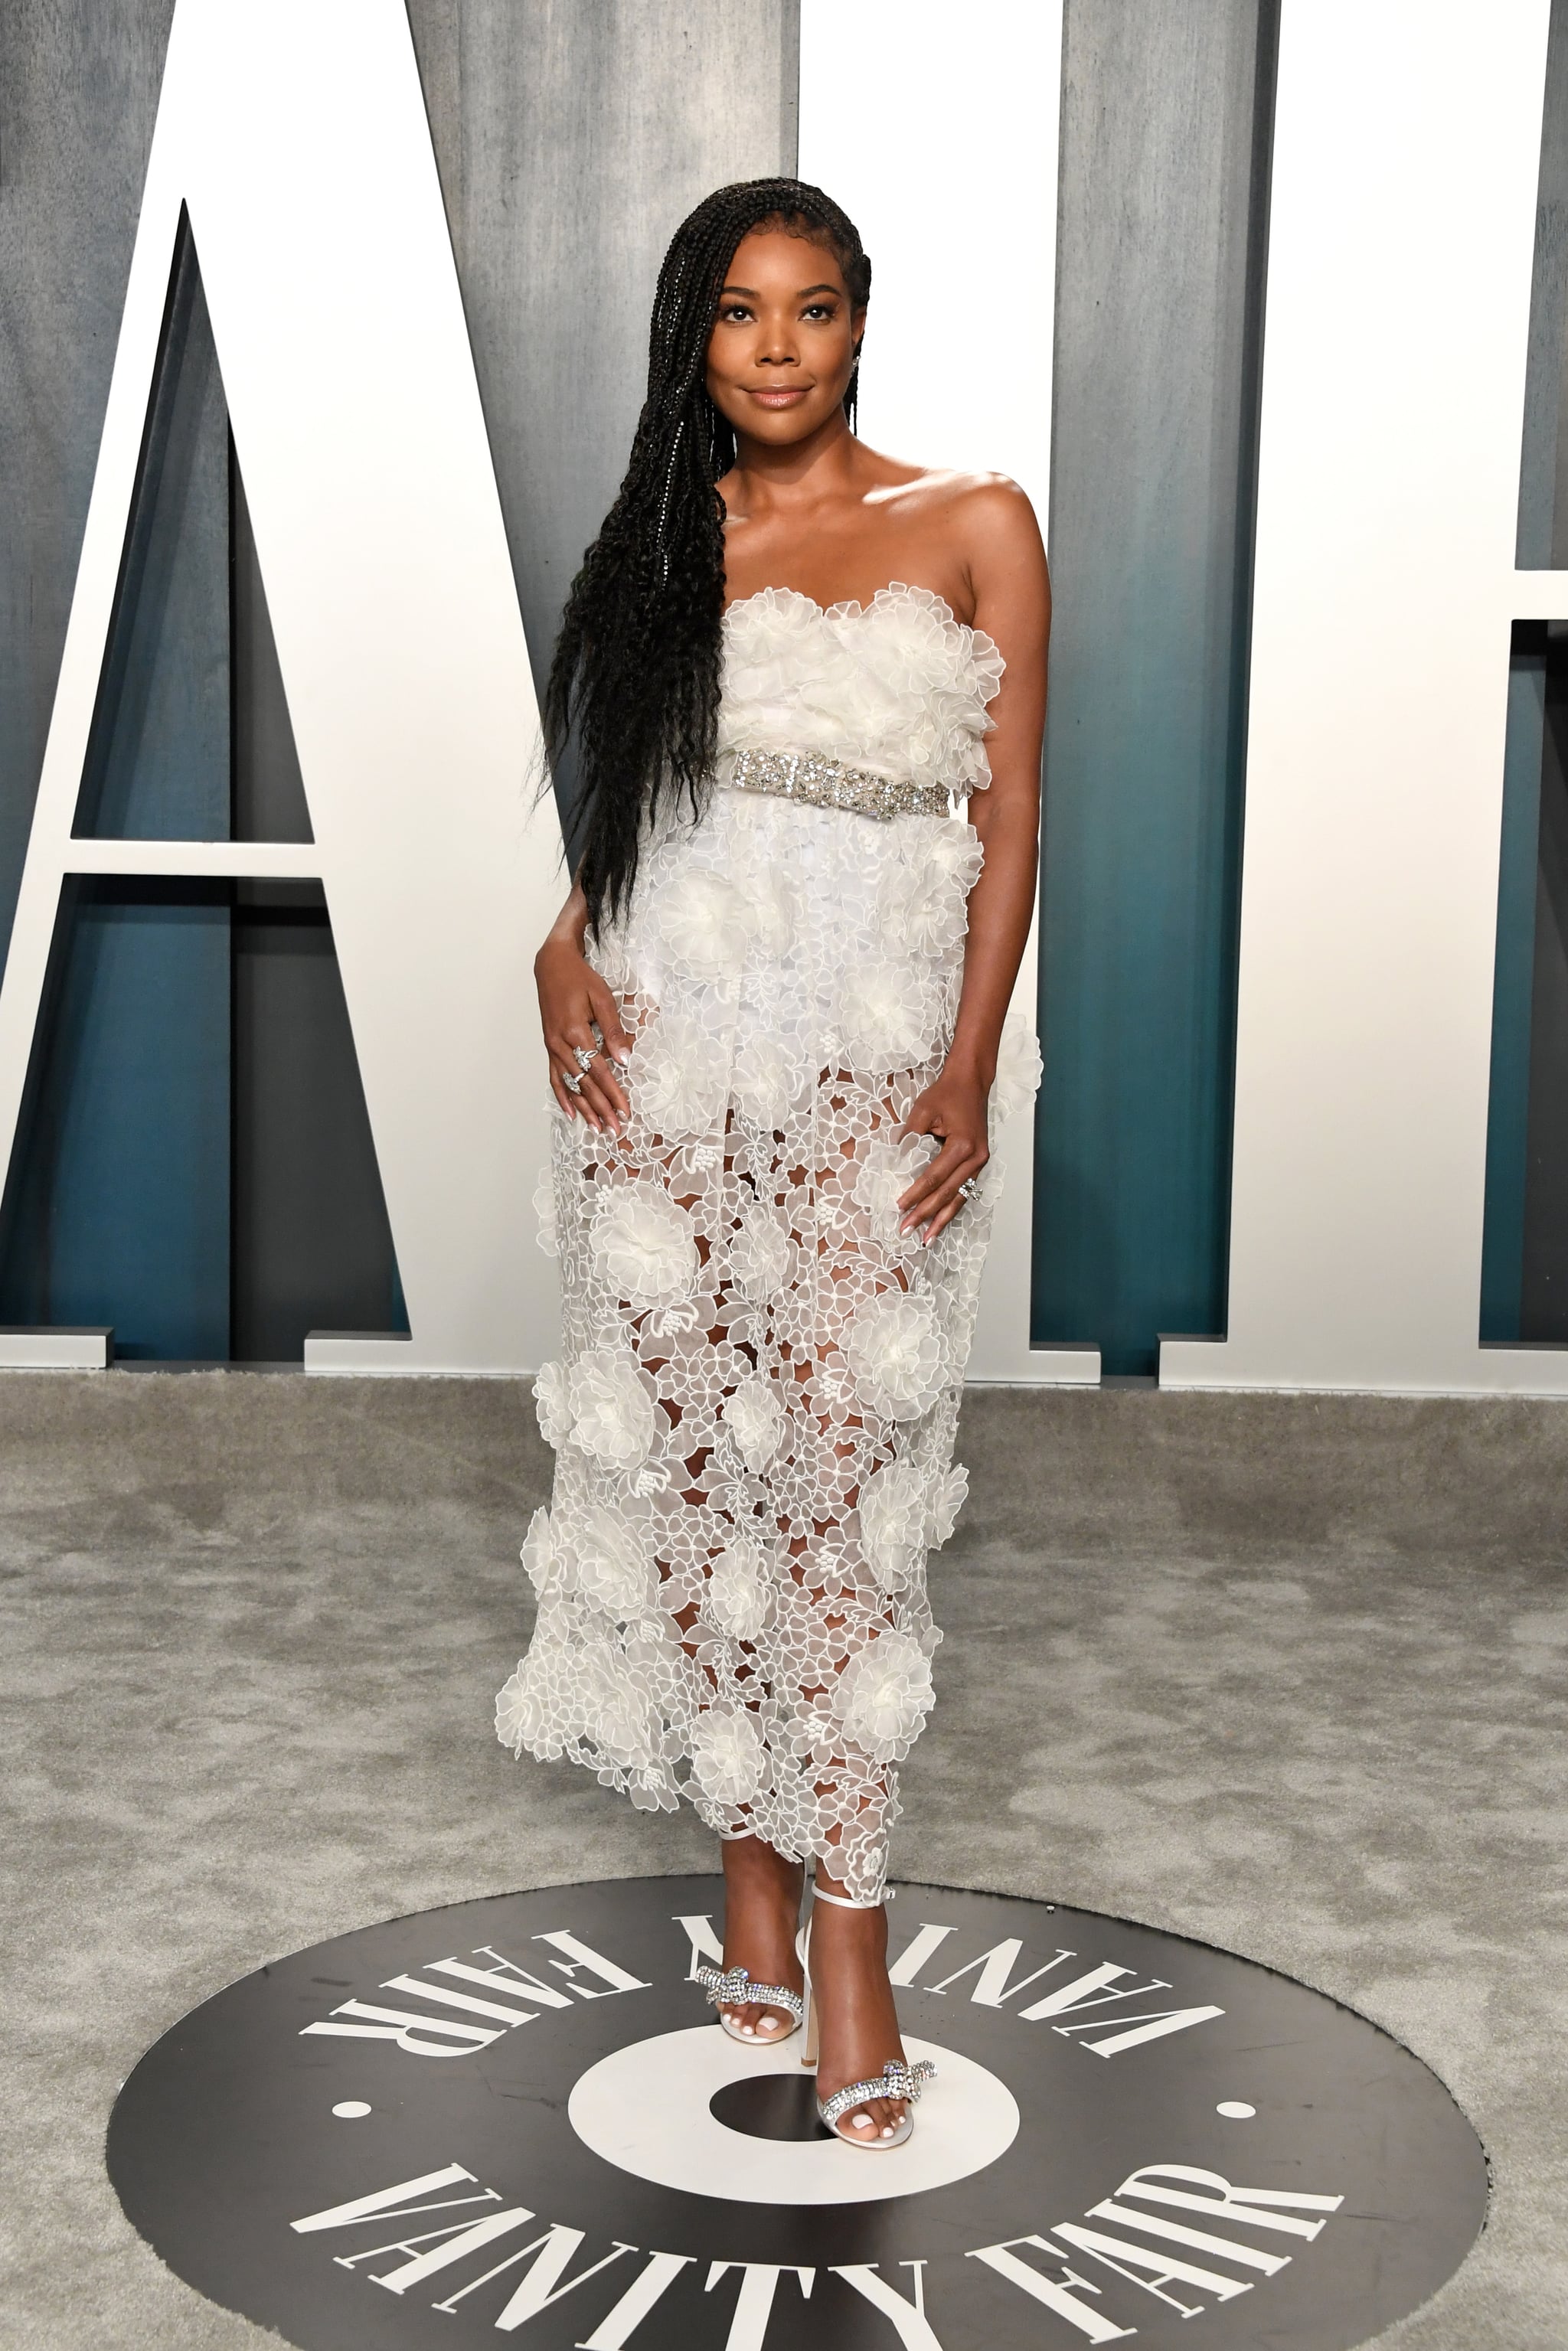 Gabrielle Union at the Vanity Fair Oscars Afterparty 2020